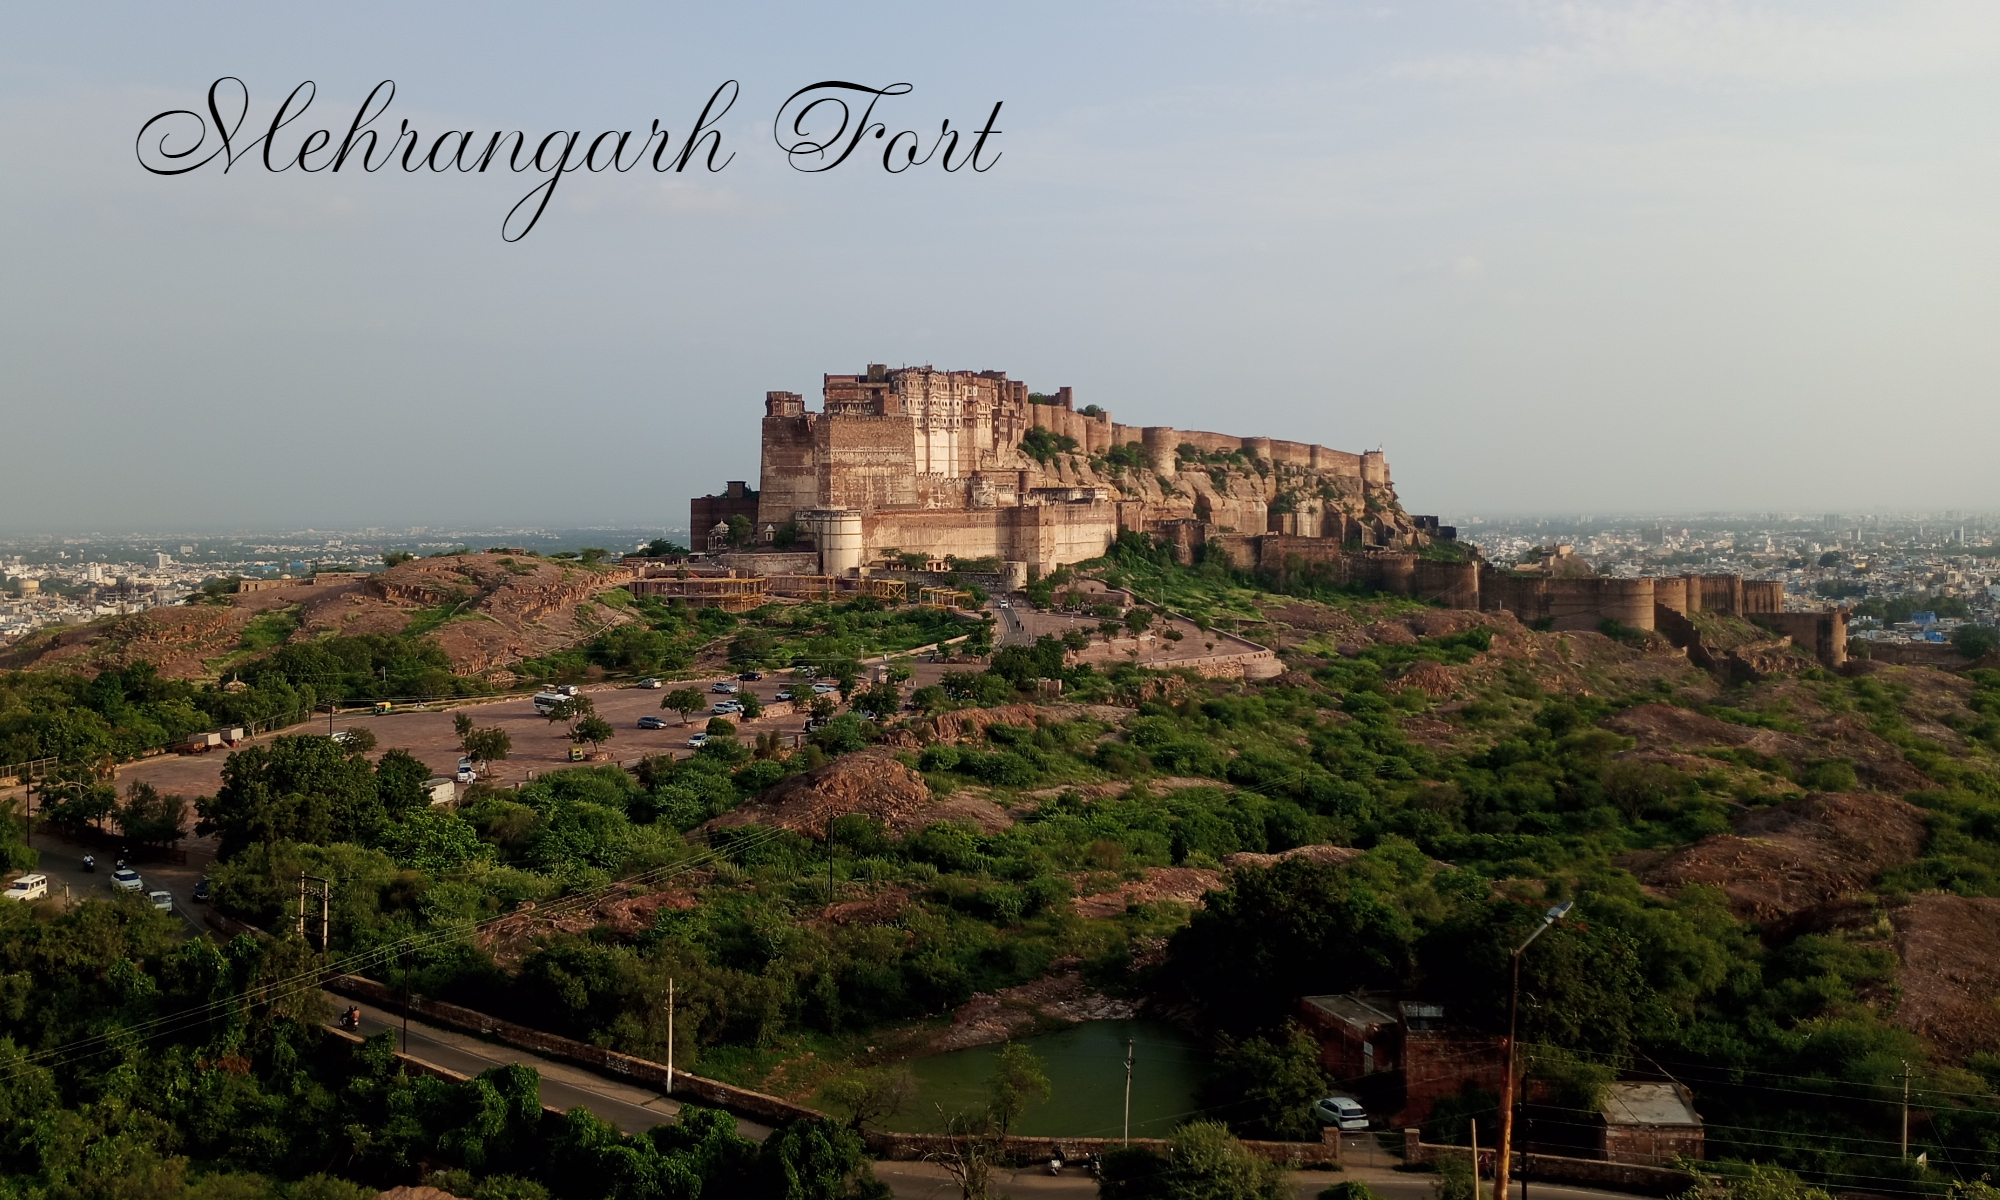 15 best places to visit near jodhpur within 100 KM, places to visit in near jodhpur, jodhpur cabs